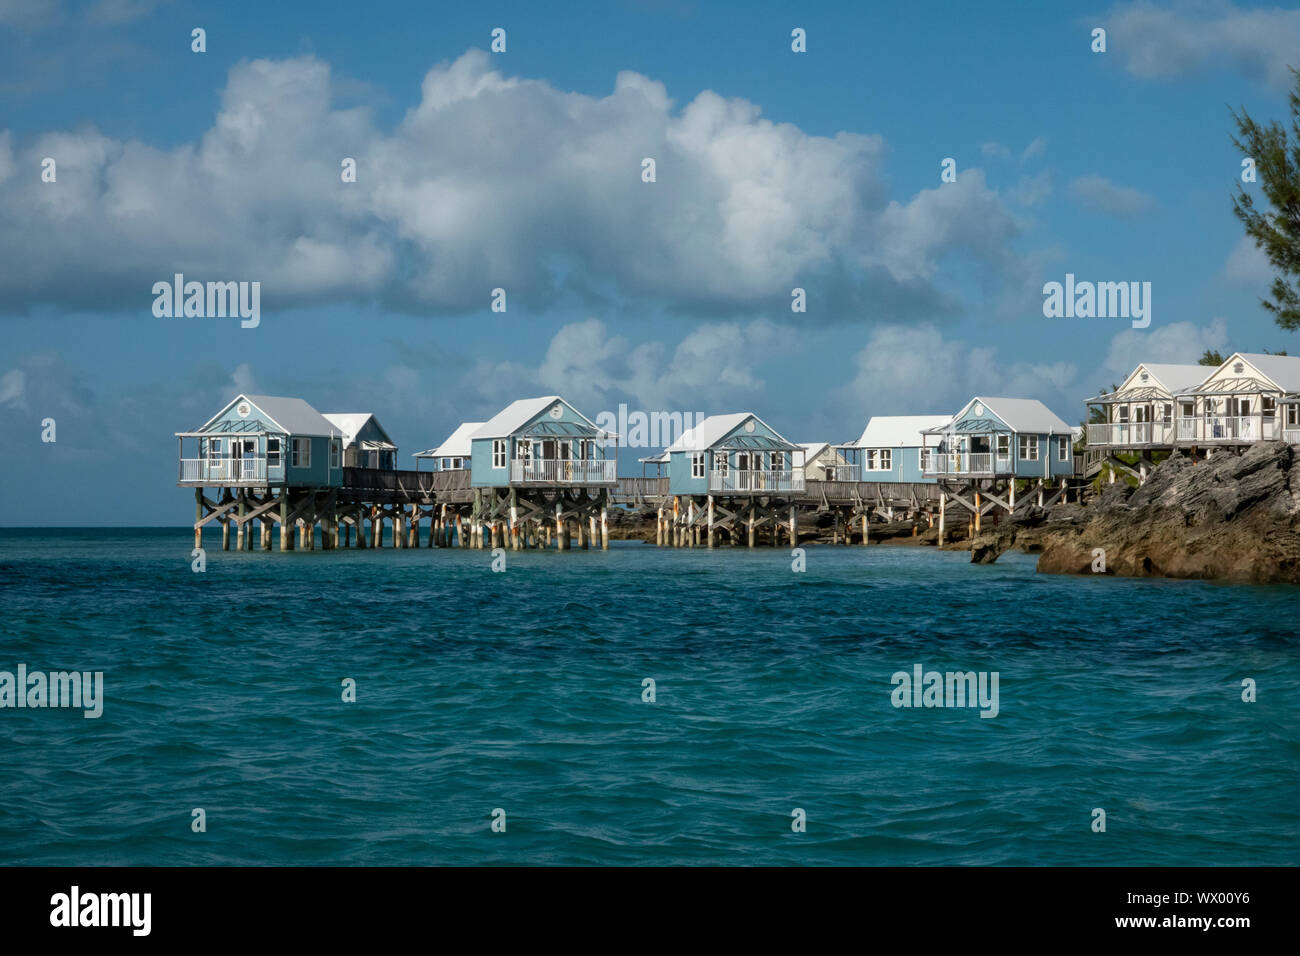 The abandoned 9 Beaches resort in Somerset Bermuda showing beach huts on stilts in the ocean Stock Photo